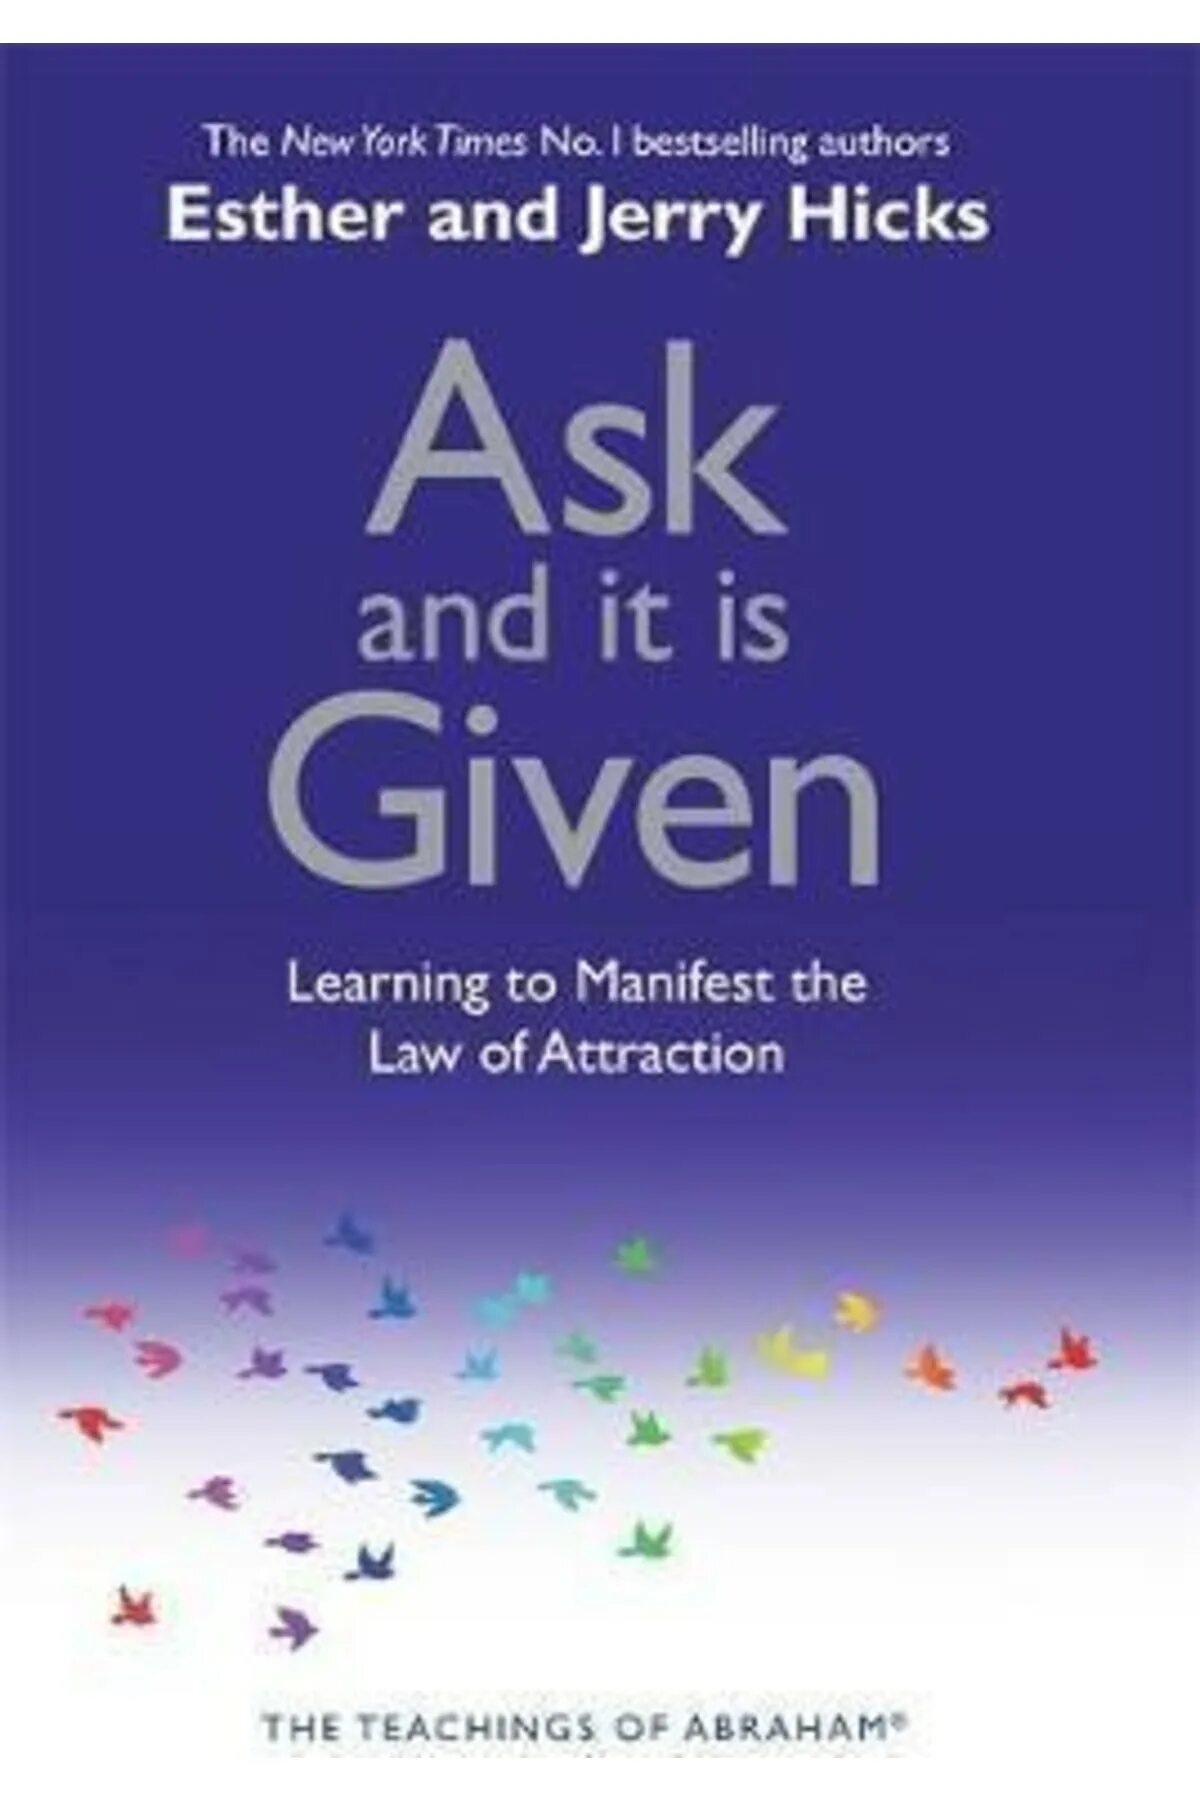 Ask and it is given. Jerry & Esther Hicks. Esther (given name). Law of attraction book. Ask uk